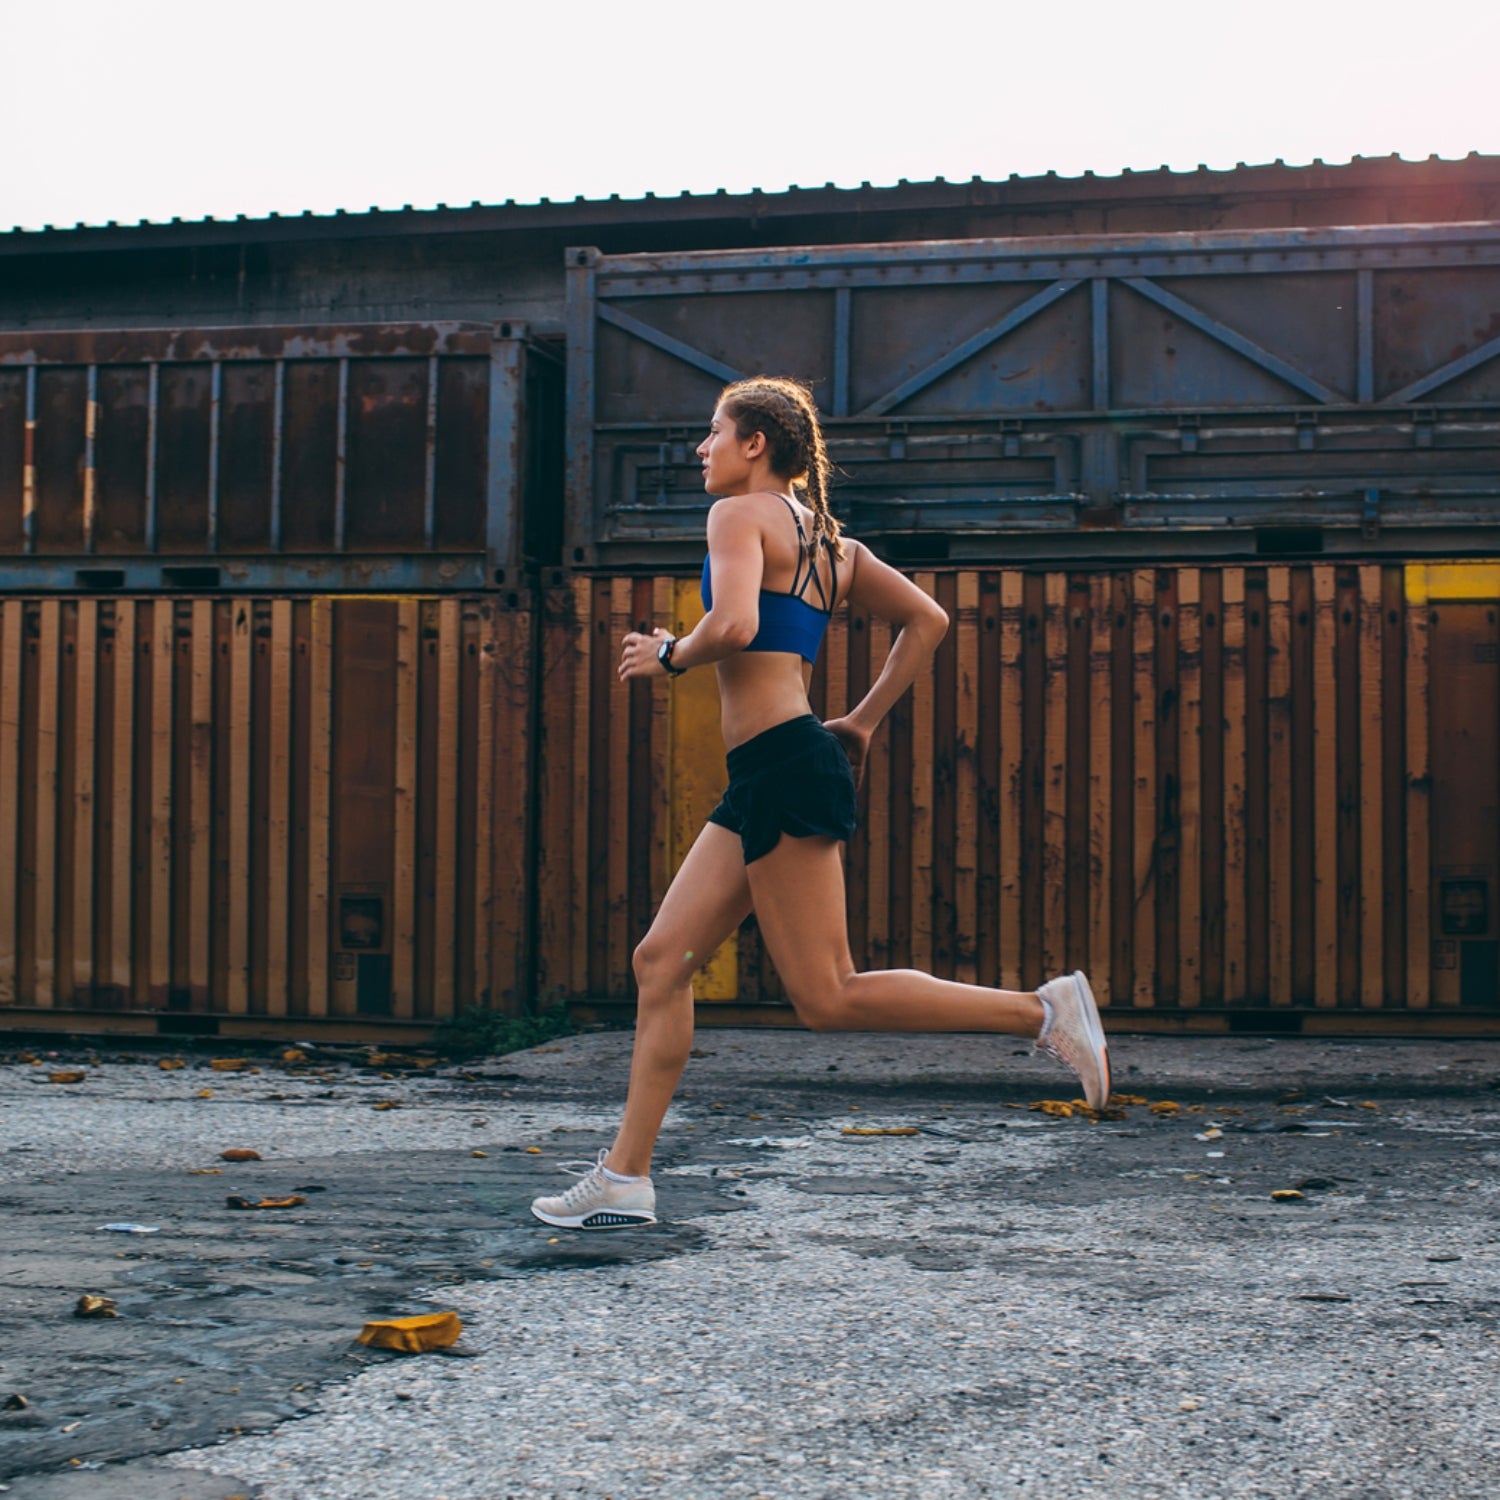 The Female Athlete: Understanding Your Menstrual Cycle